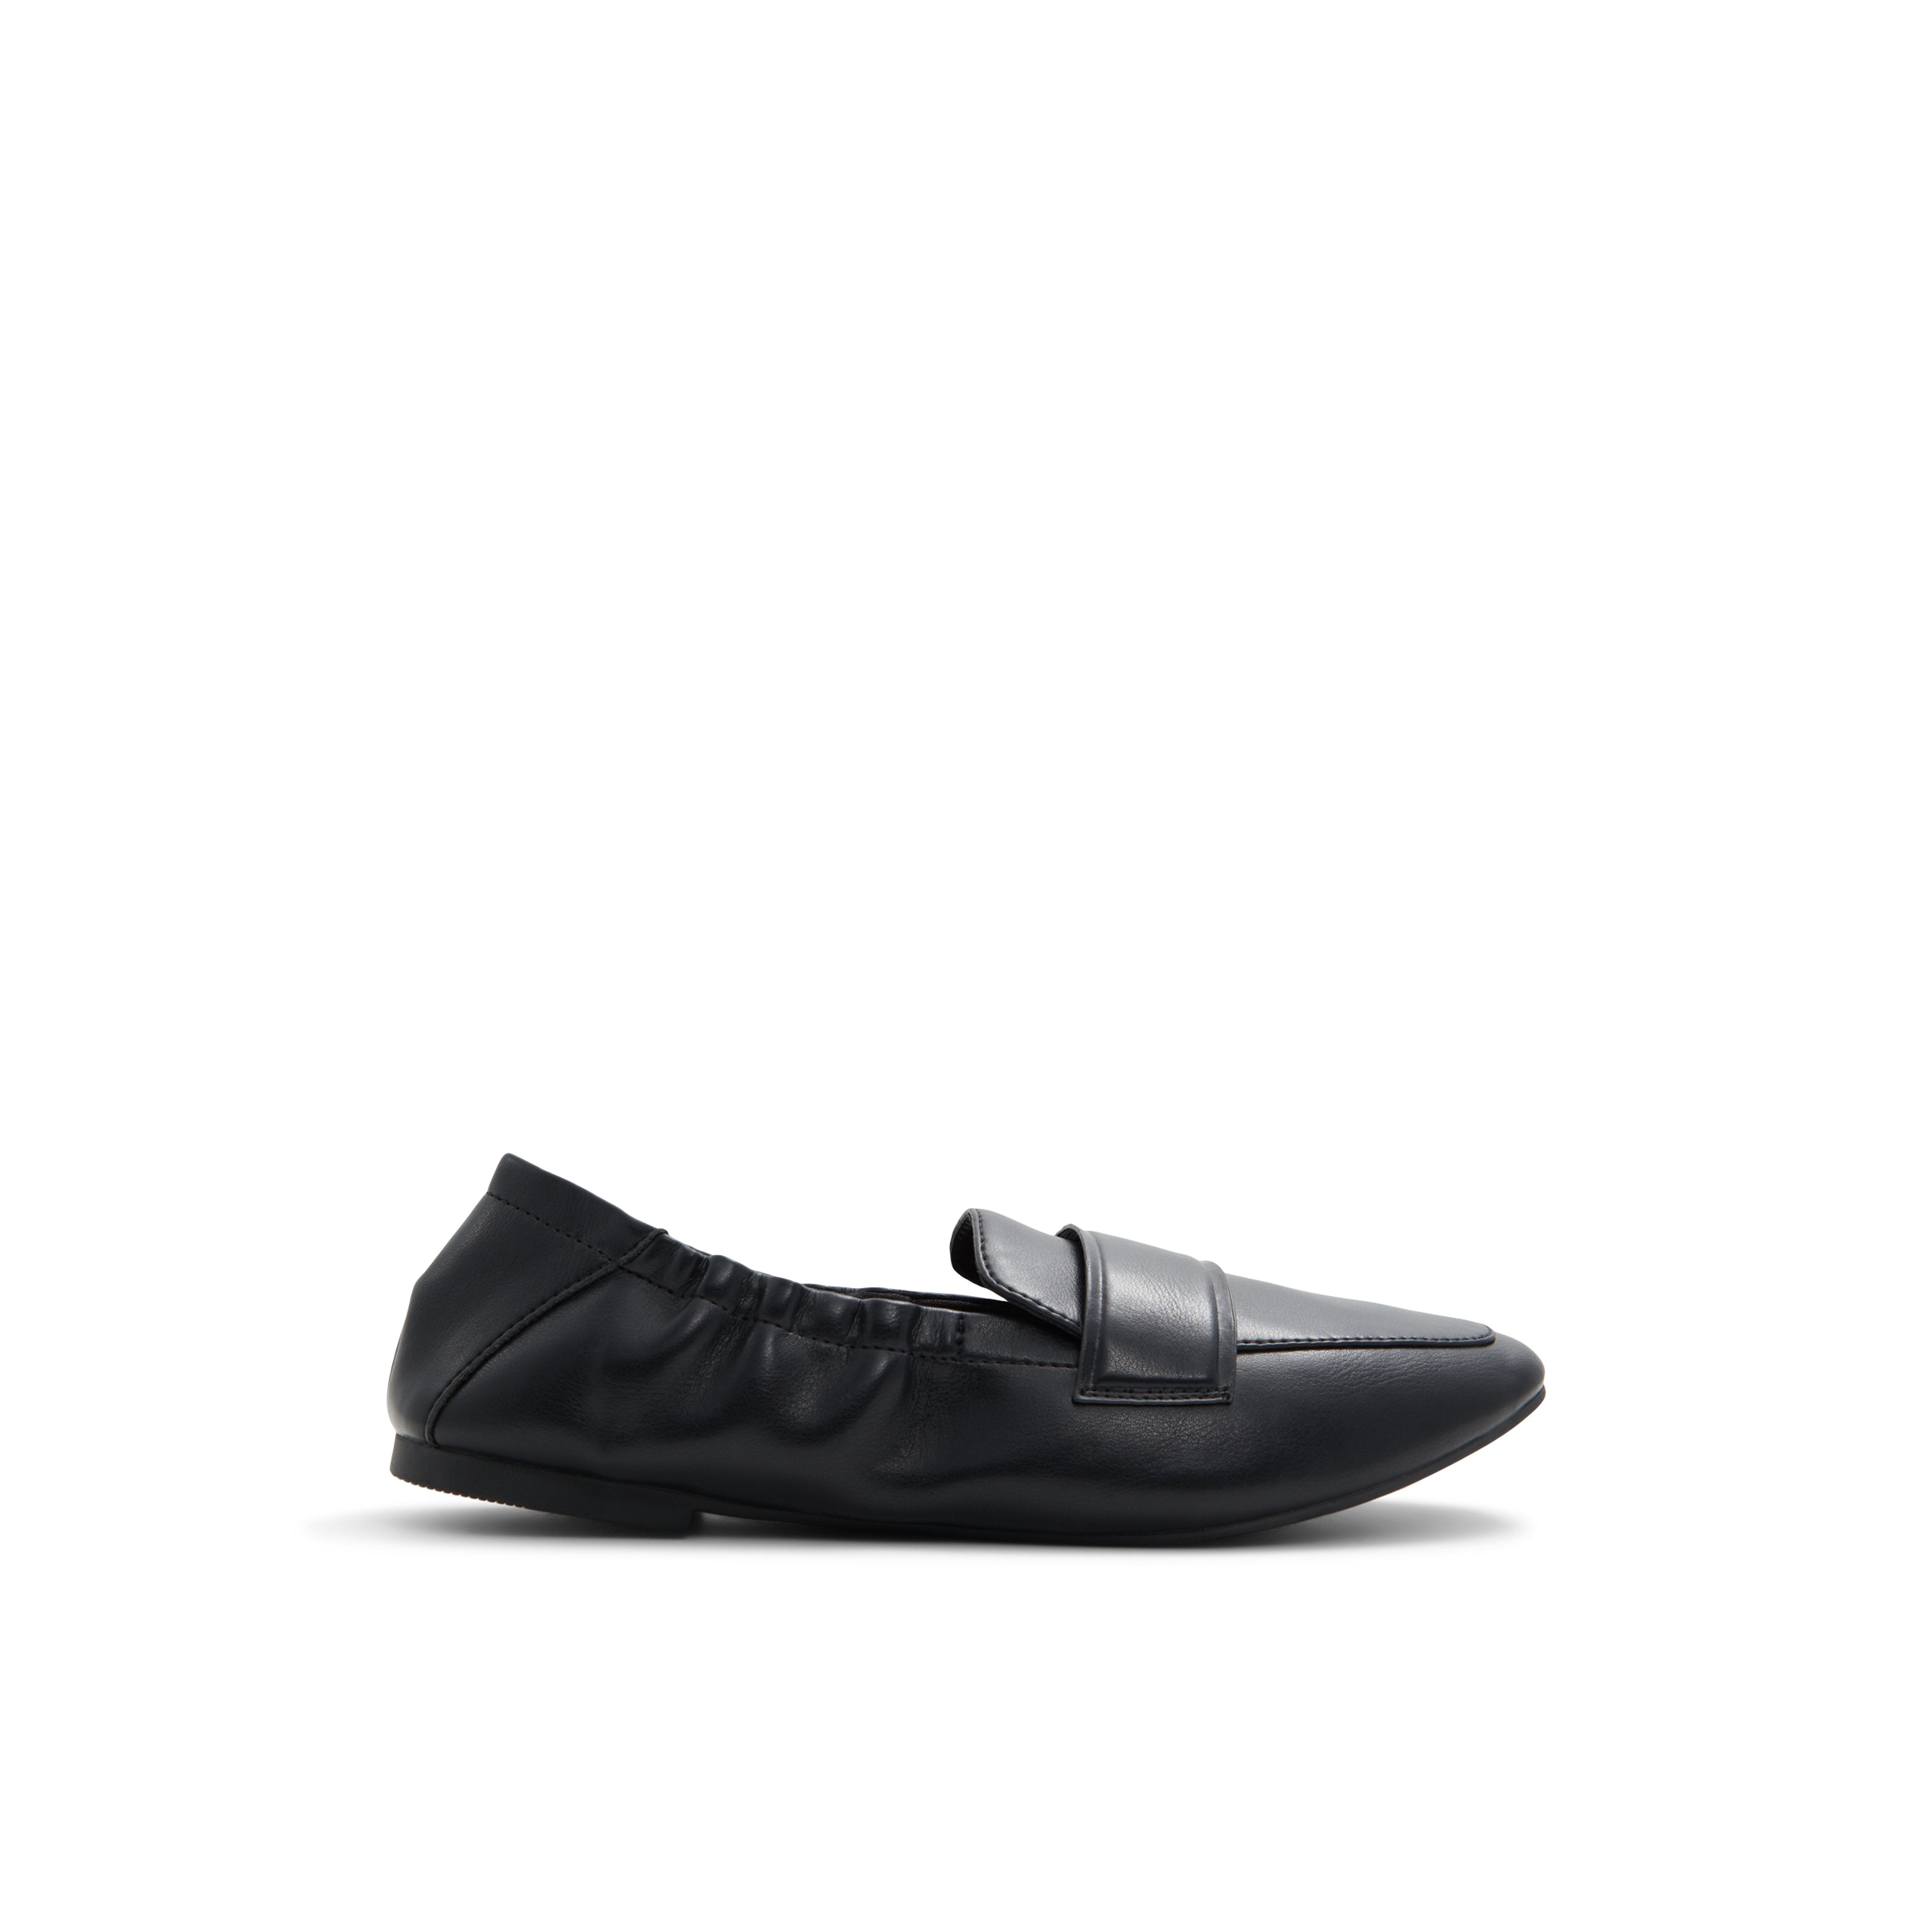 Tonii Penny loafers